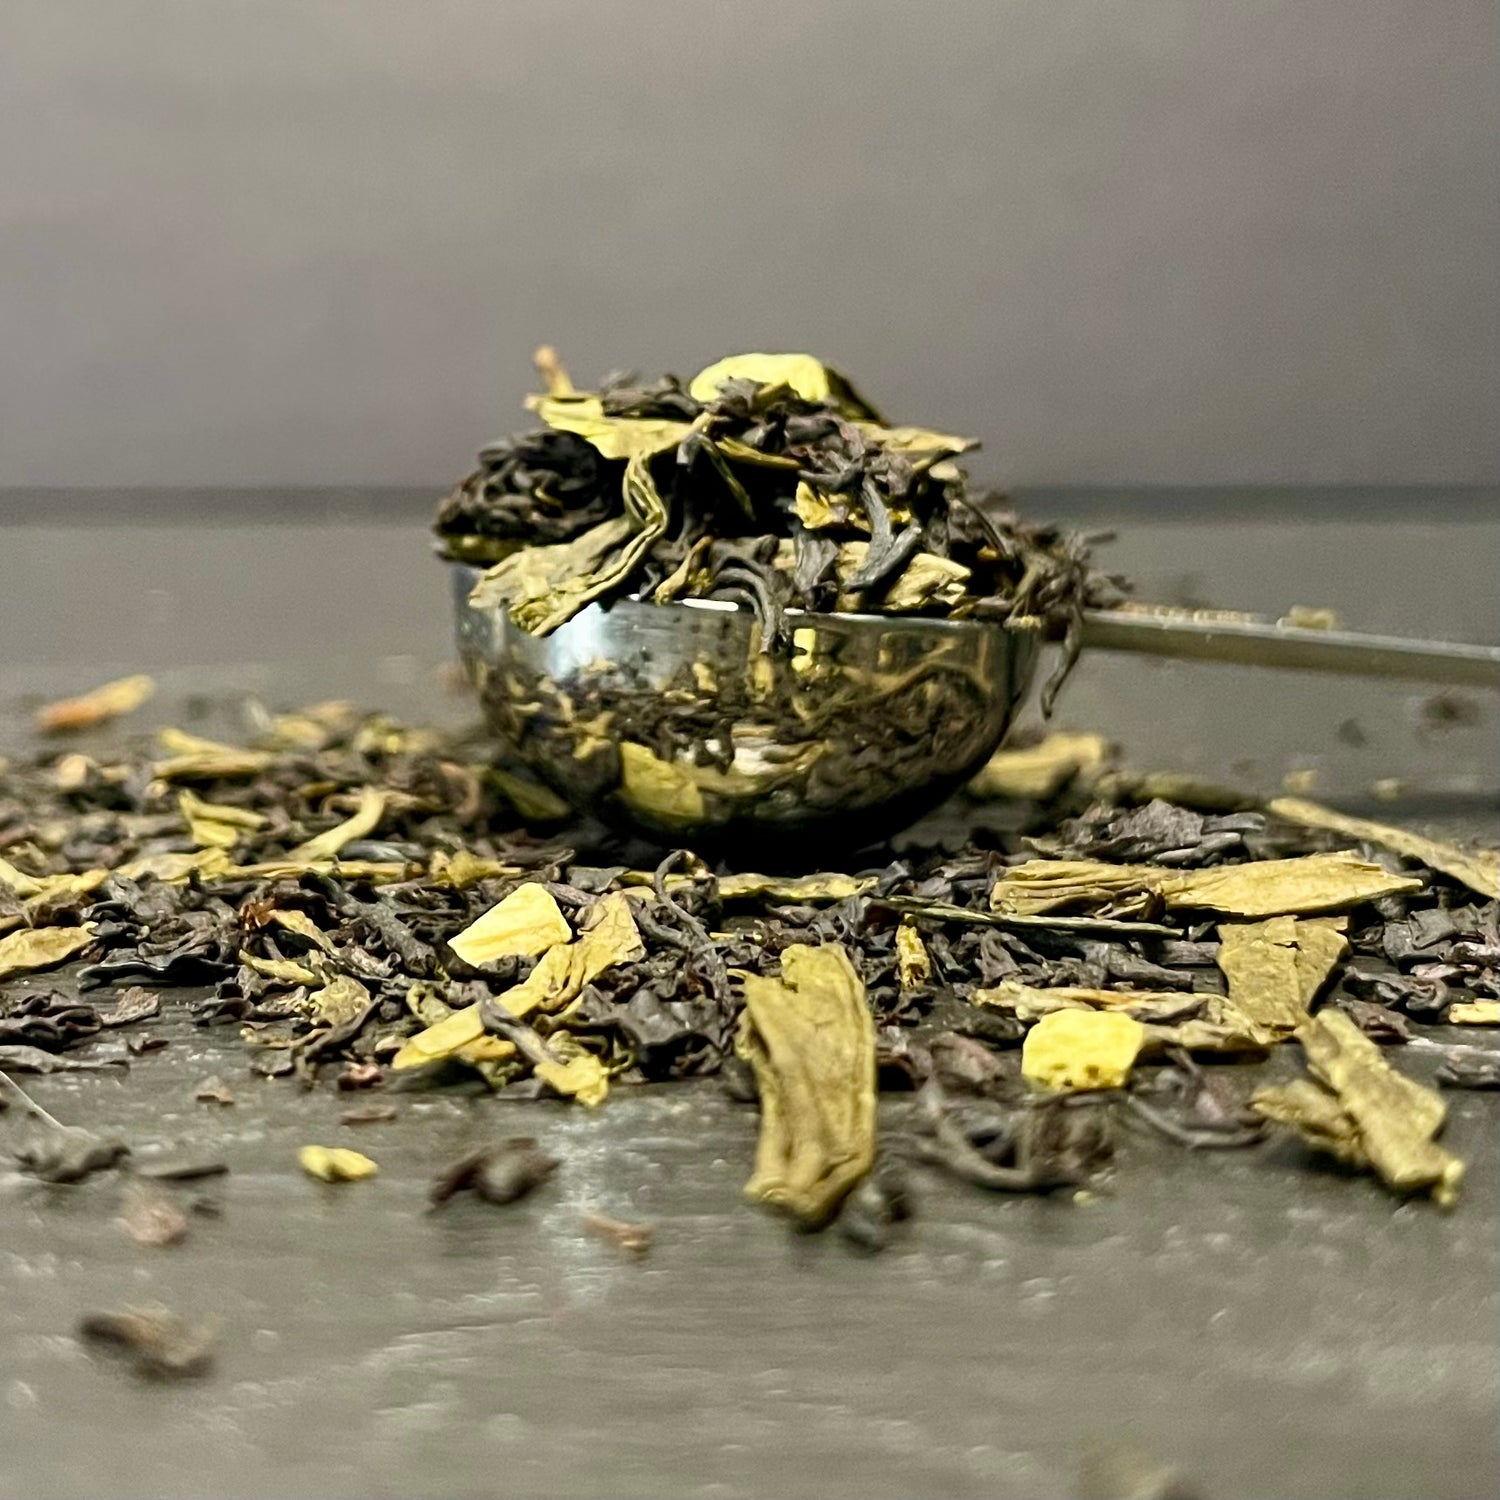 Vive Florence - Green & Black Tea Blend with Oranges by The Cove Tea Co